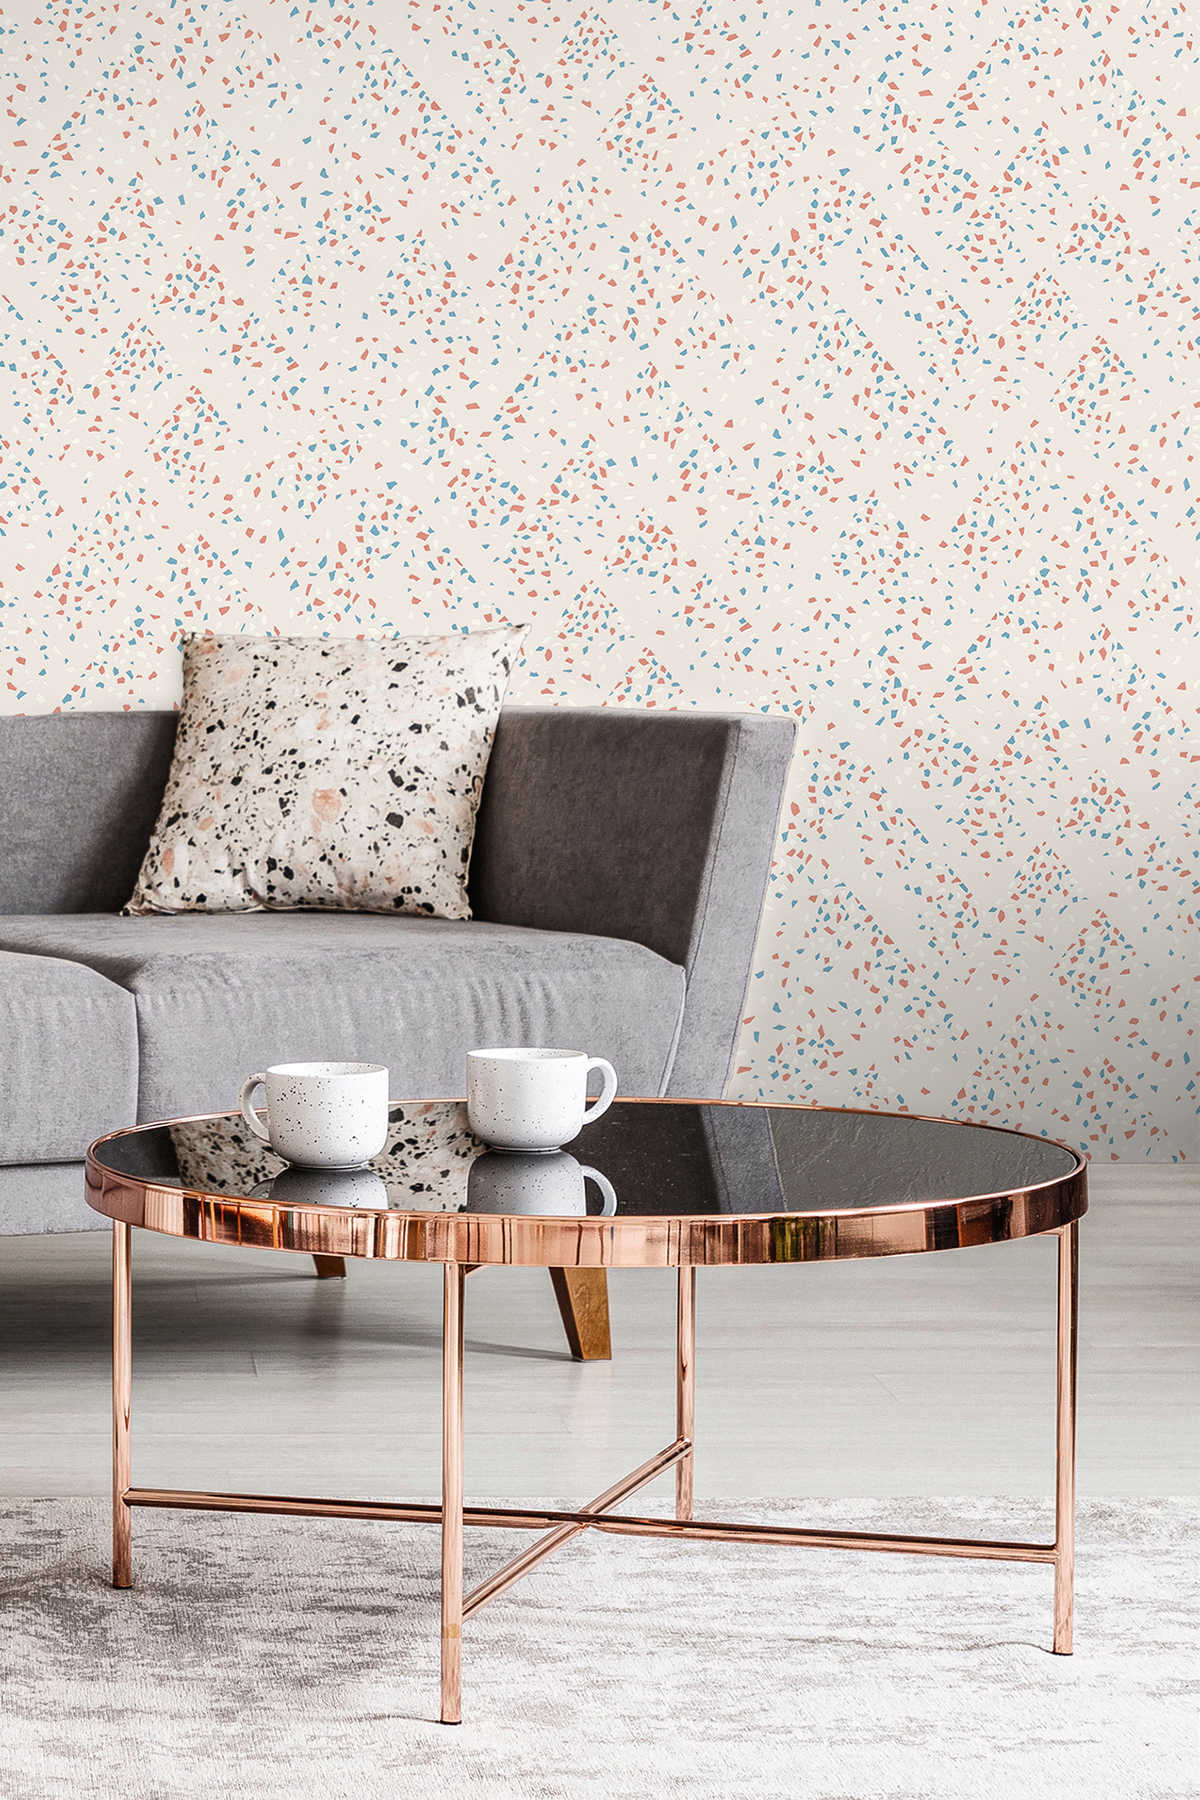             Non-woven wallpaper with terrazzo pattern - blue, pink, white
        